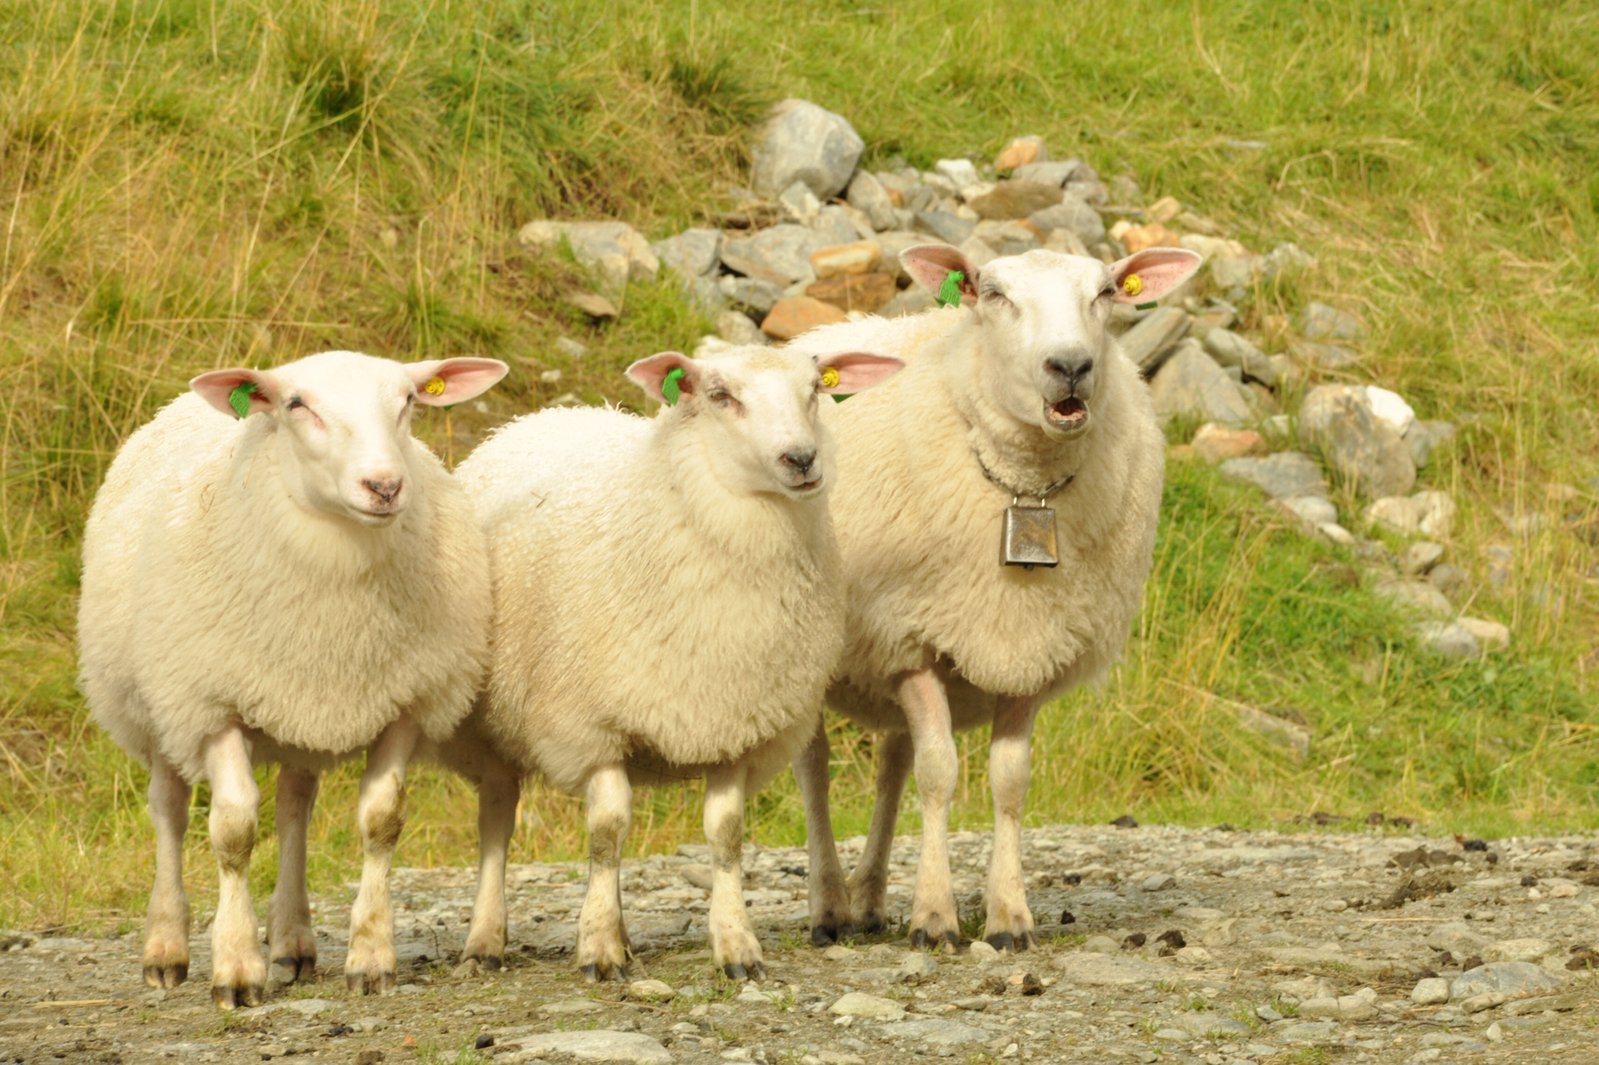 three sheep stand together on a dirt ground